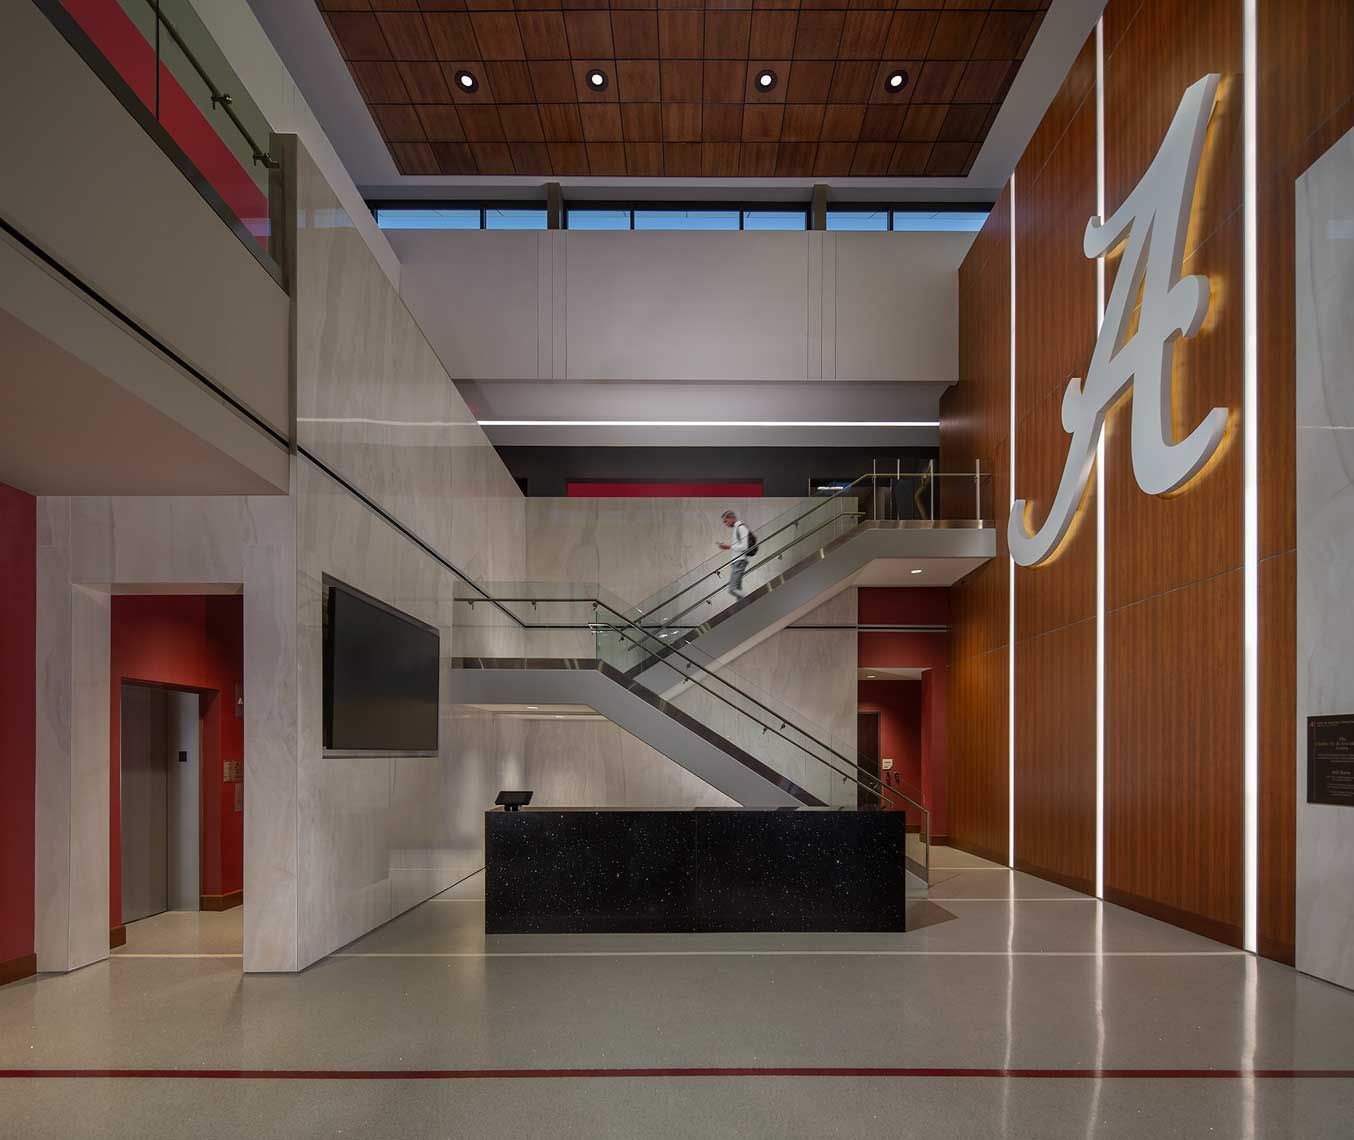 A student athlete descends the stairs in the striking University of Alabama Training Facility Lobby